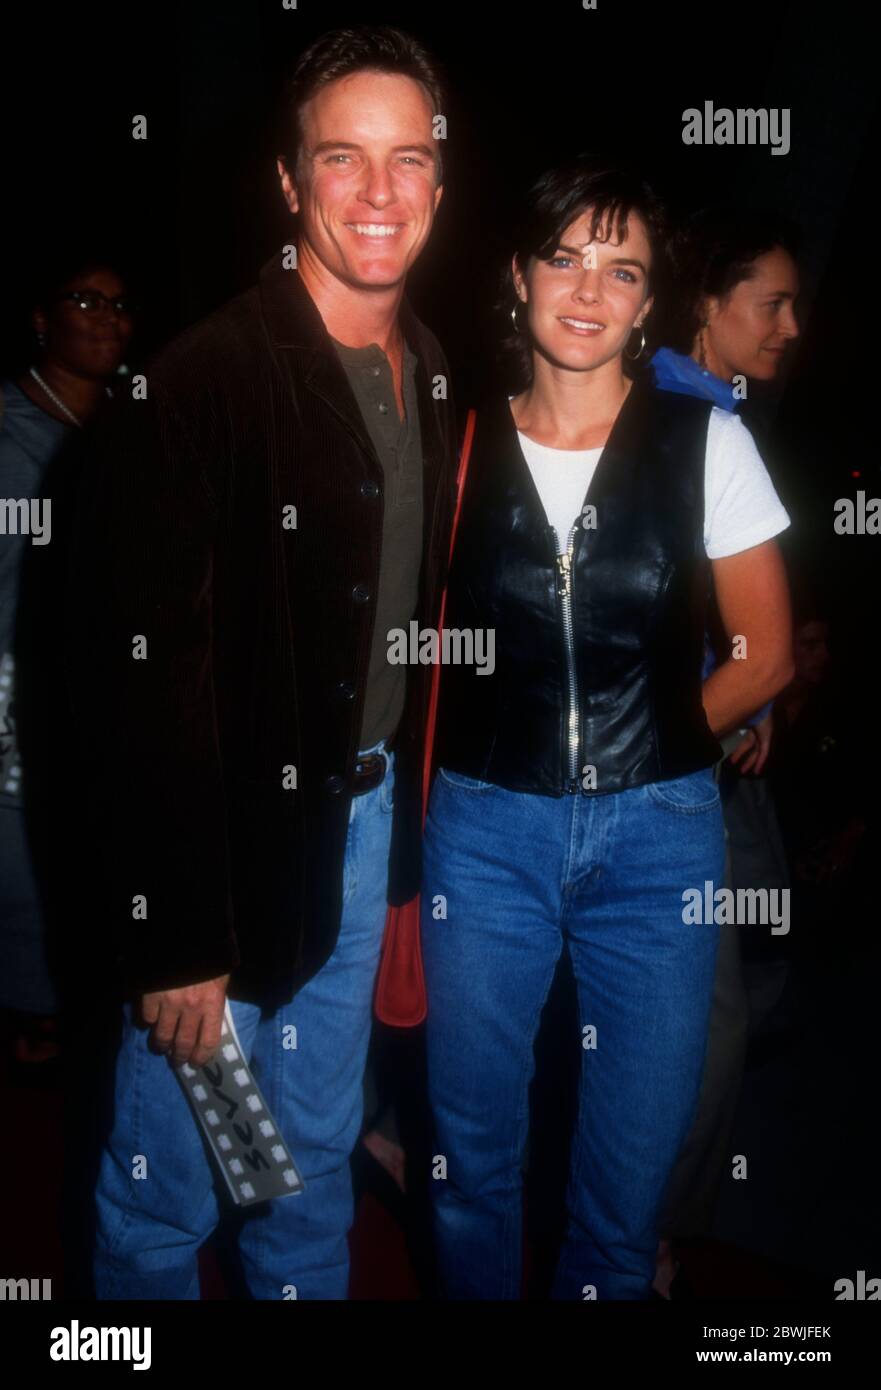 Beverly Hills, California, USA 19th September 1995 Actor Lindan Ashby and actress wife Susan Walters attend New Line Cinema's 'Seven' (aka Se7en) Premiere on September 1995 at Samuel Goldwyn Theater in Beverly Hills, California, USA. Photo by Barry King/Alamy Stock Photo Stock Photo